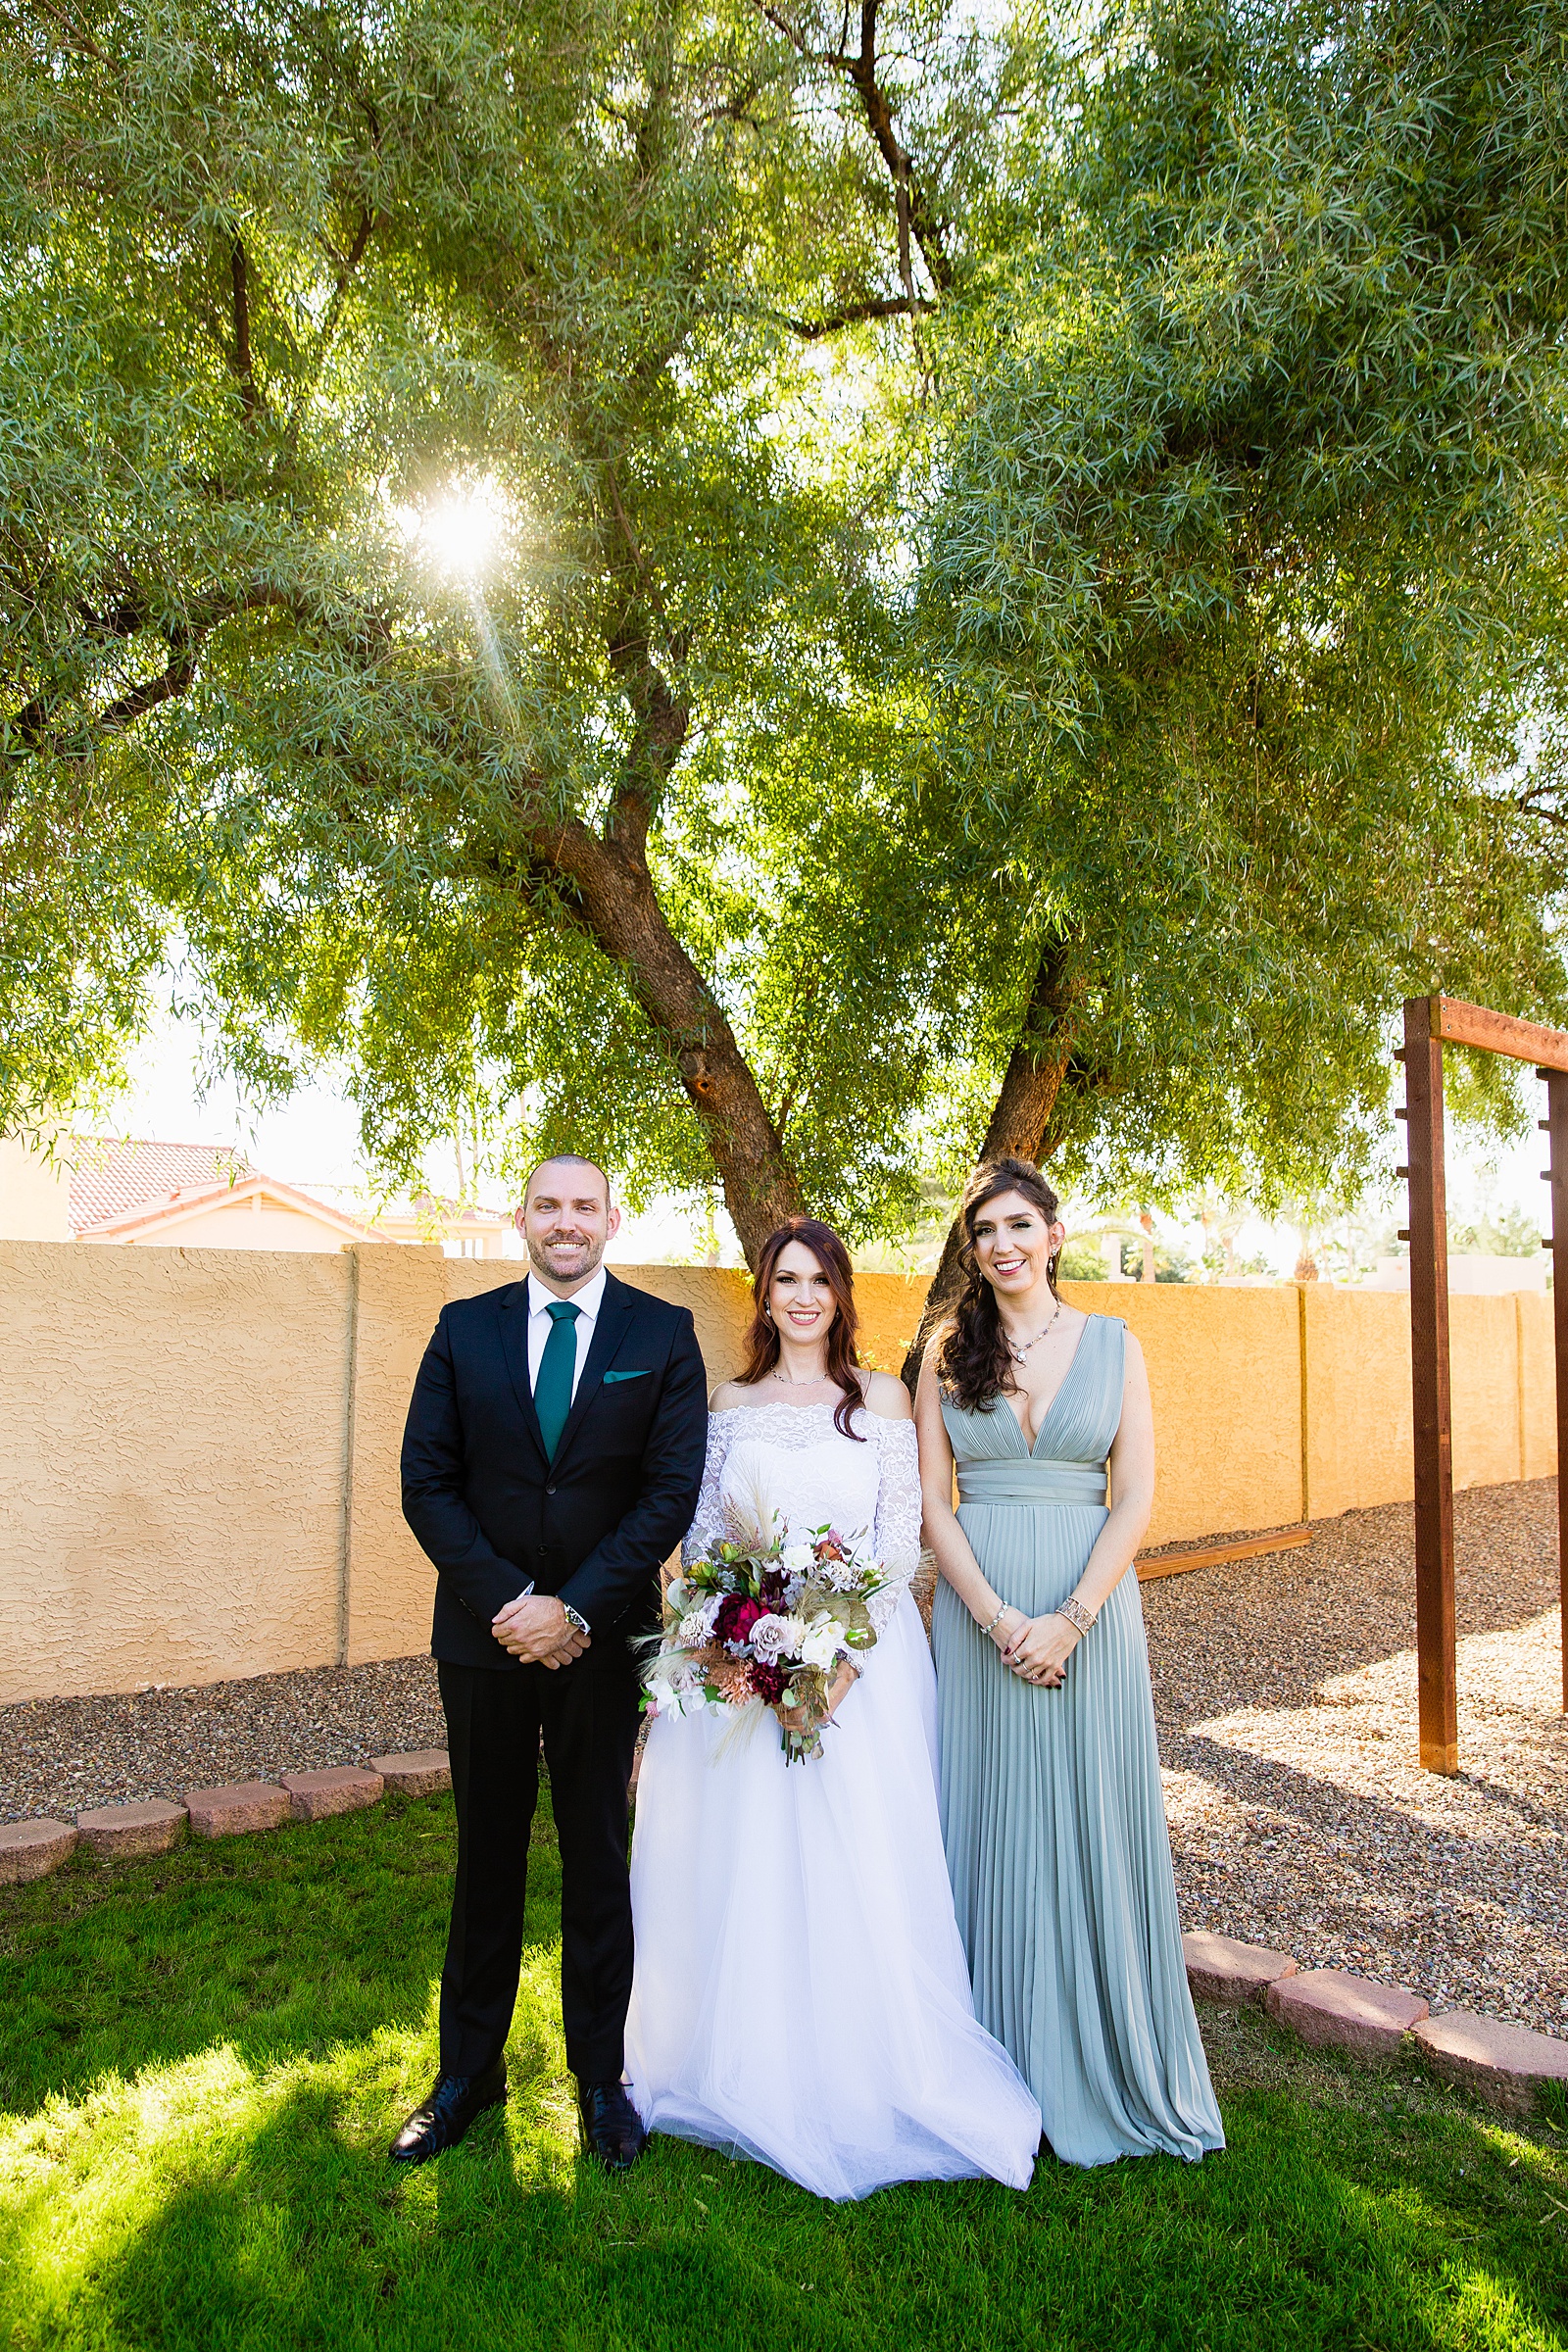 Bride and mixed gender bridal party together at a Backyard Micro wedding by Arizona wedding photographer PMA Photography.